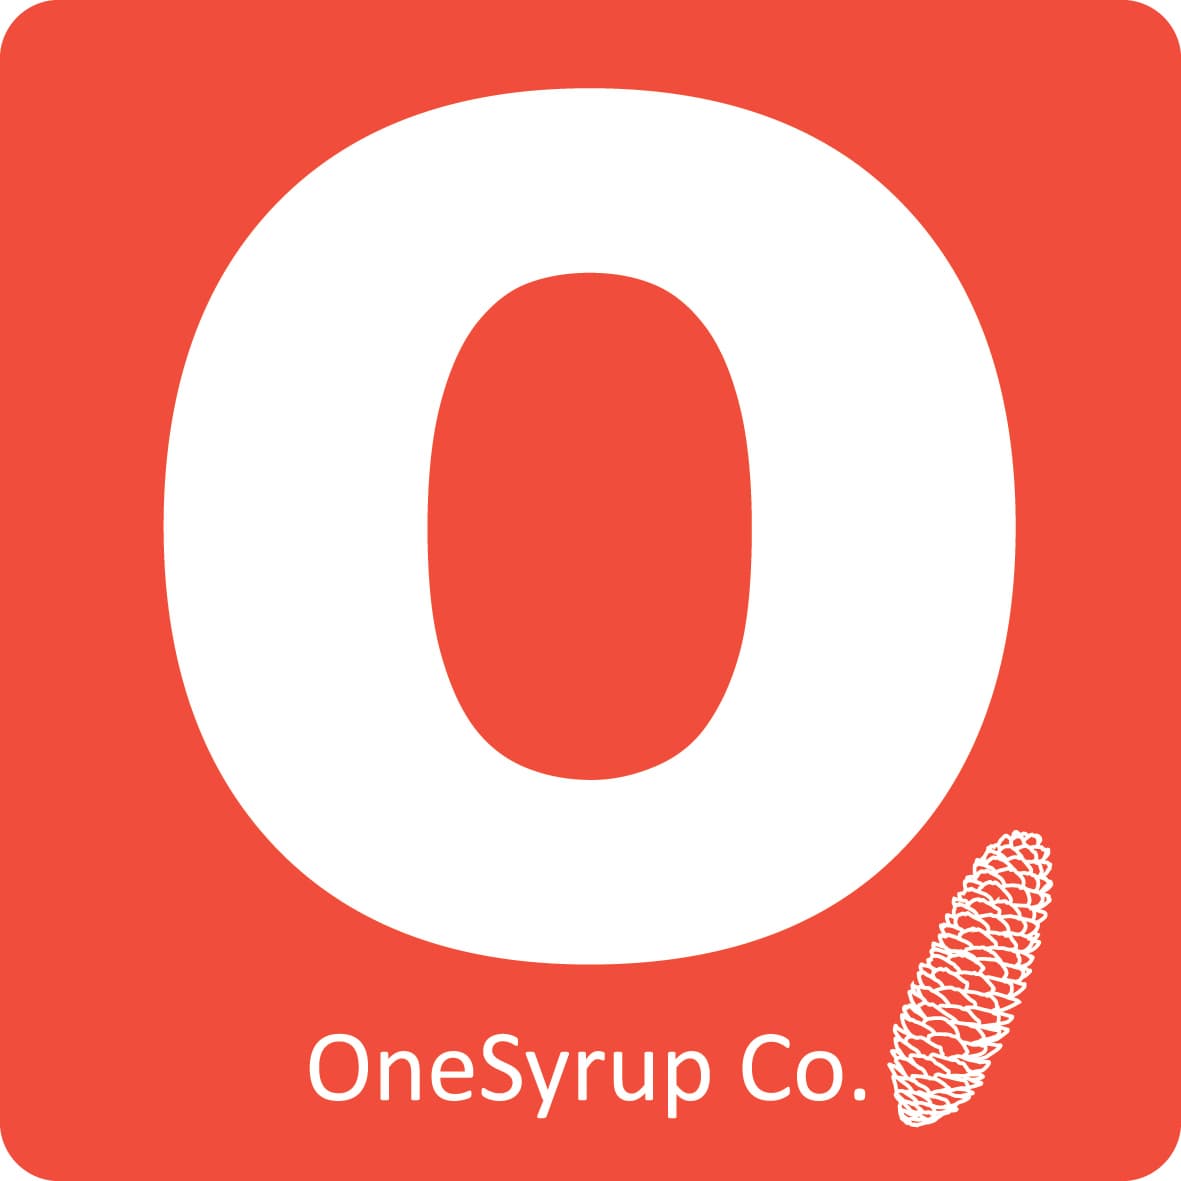 OneSyrup Co.